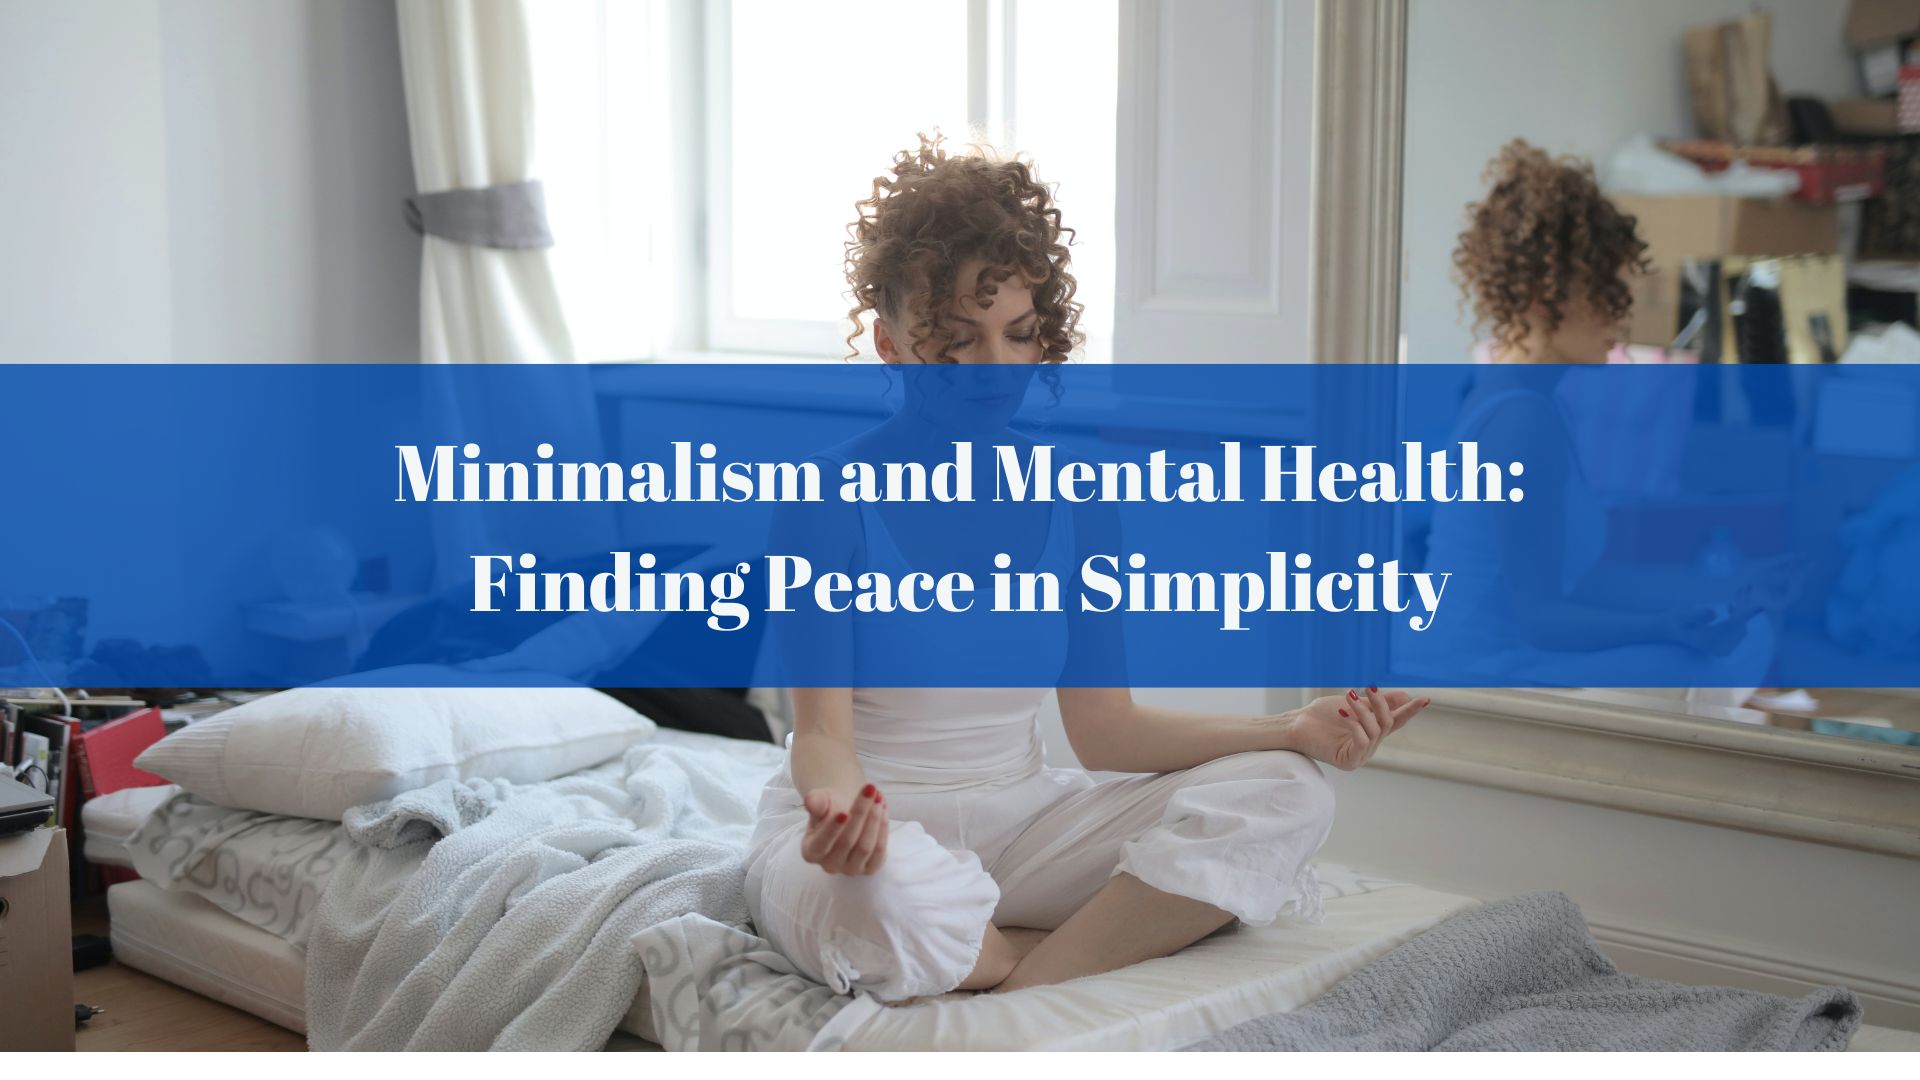 Minimalism and Mental Health: Finding Peace in Simplicity